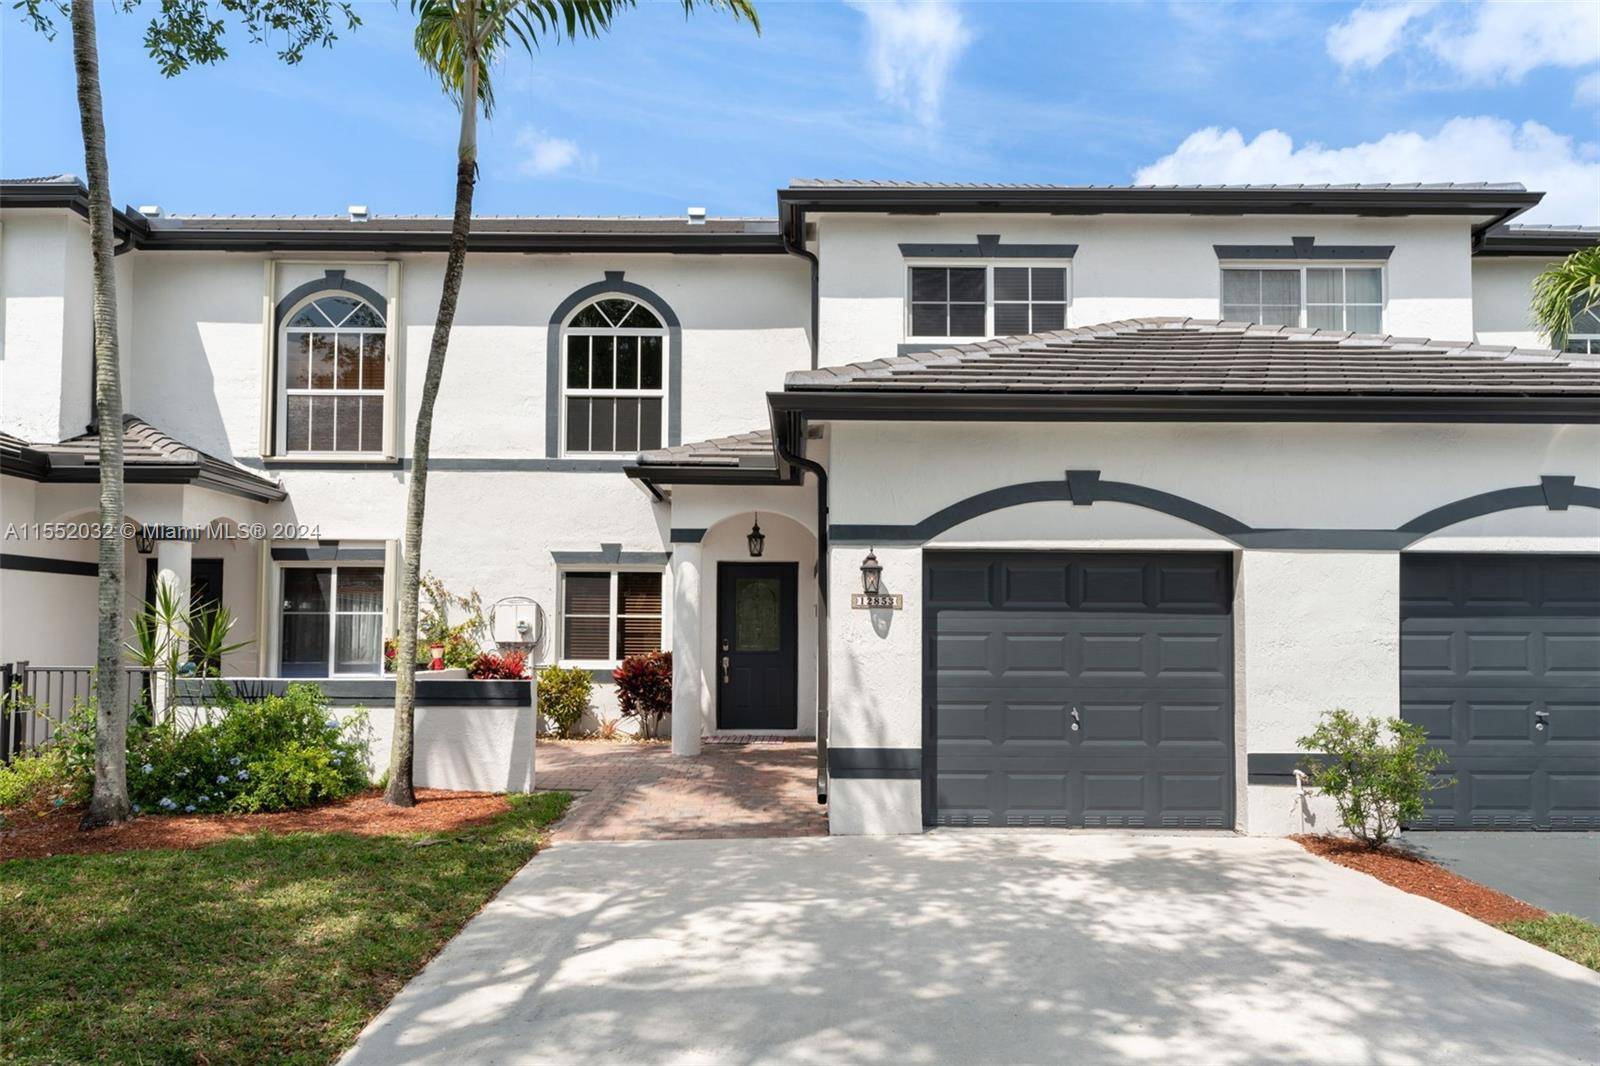 Welcome to this beautifully remodeled townhouse nestled in the heart of Miramar, FL.